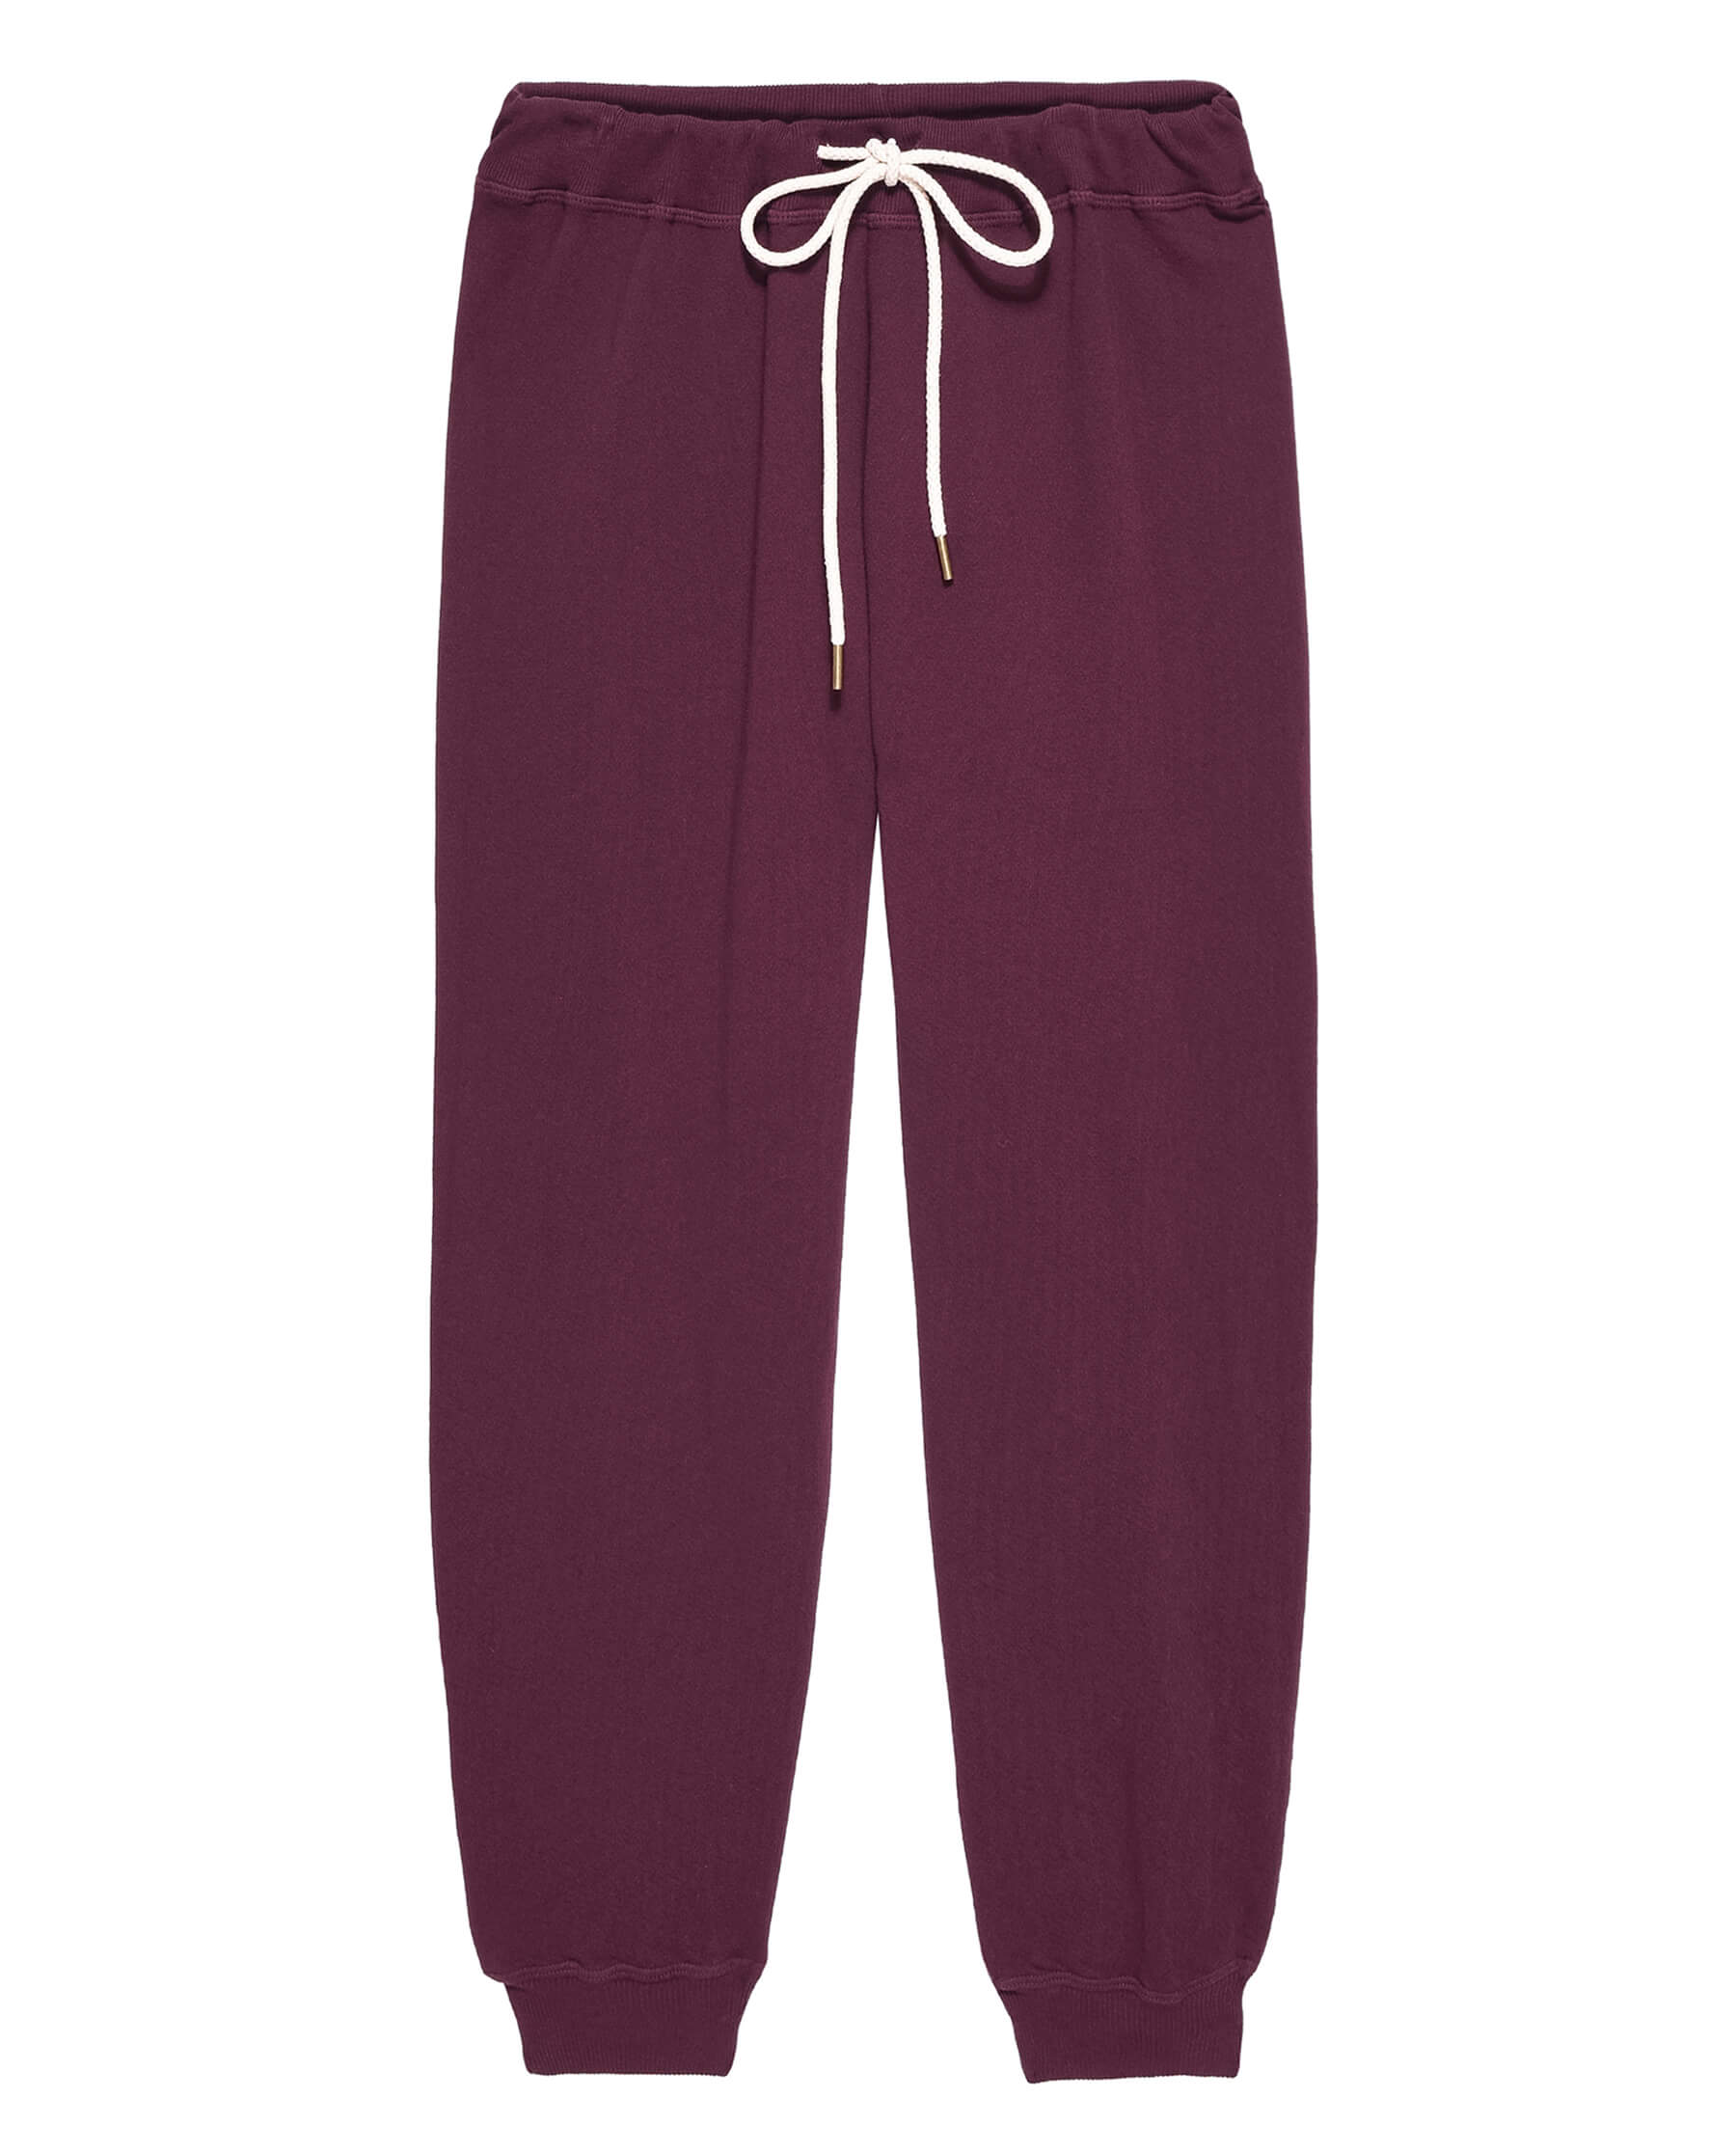 The Cropped Sweatpant. Solid -- Mulled Wine SWEATPANTS THE GREAT. HOL 23 KNITS